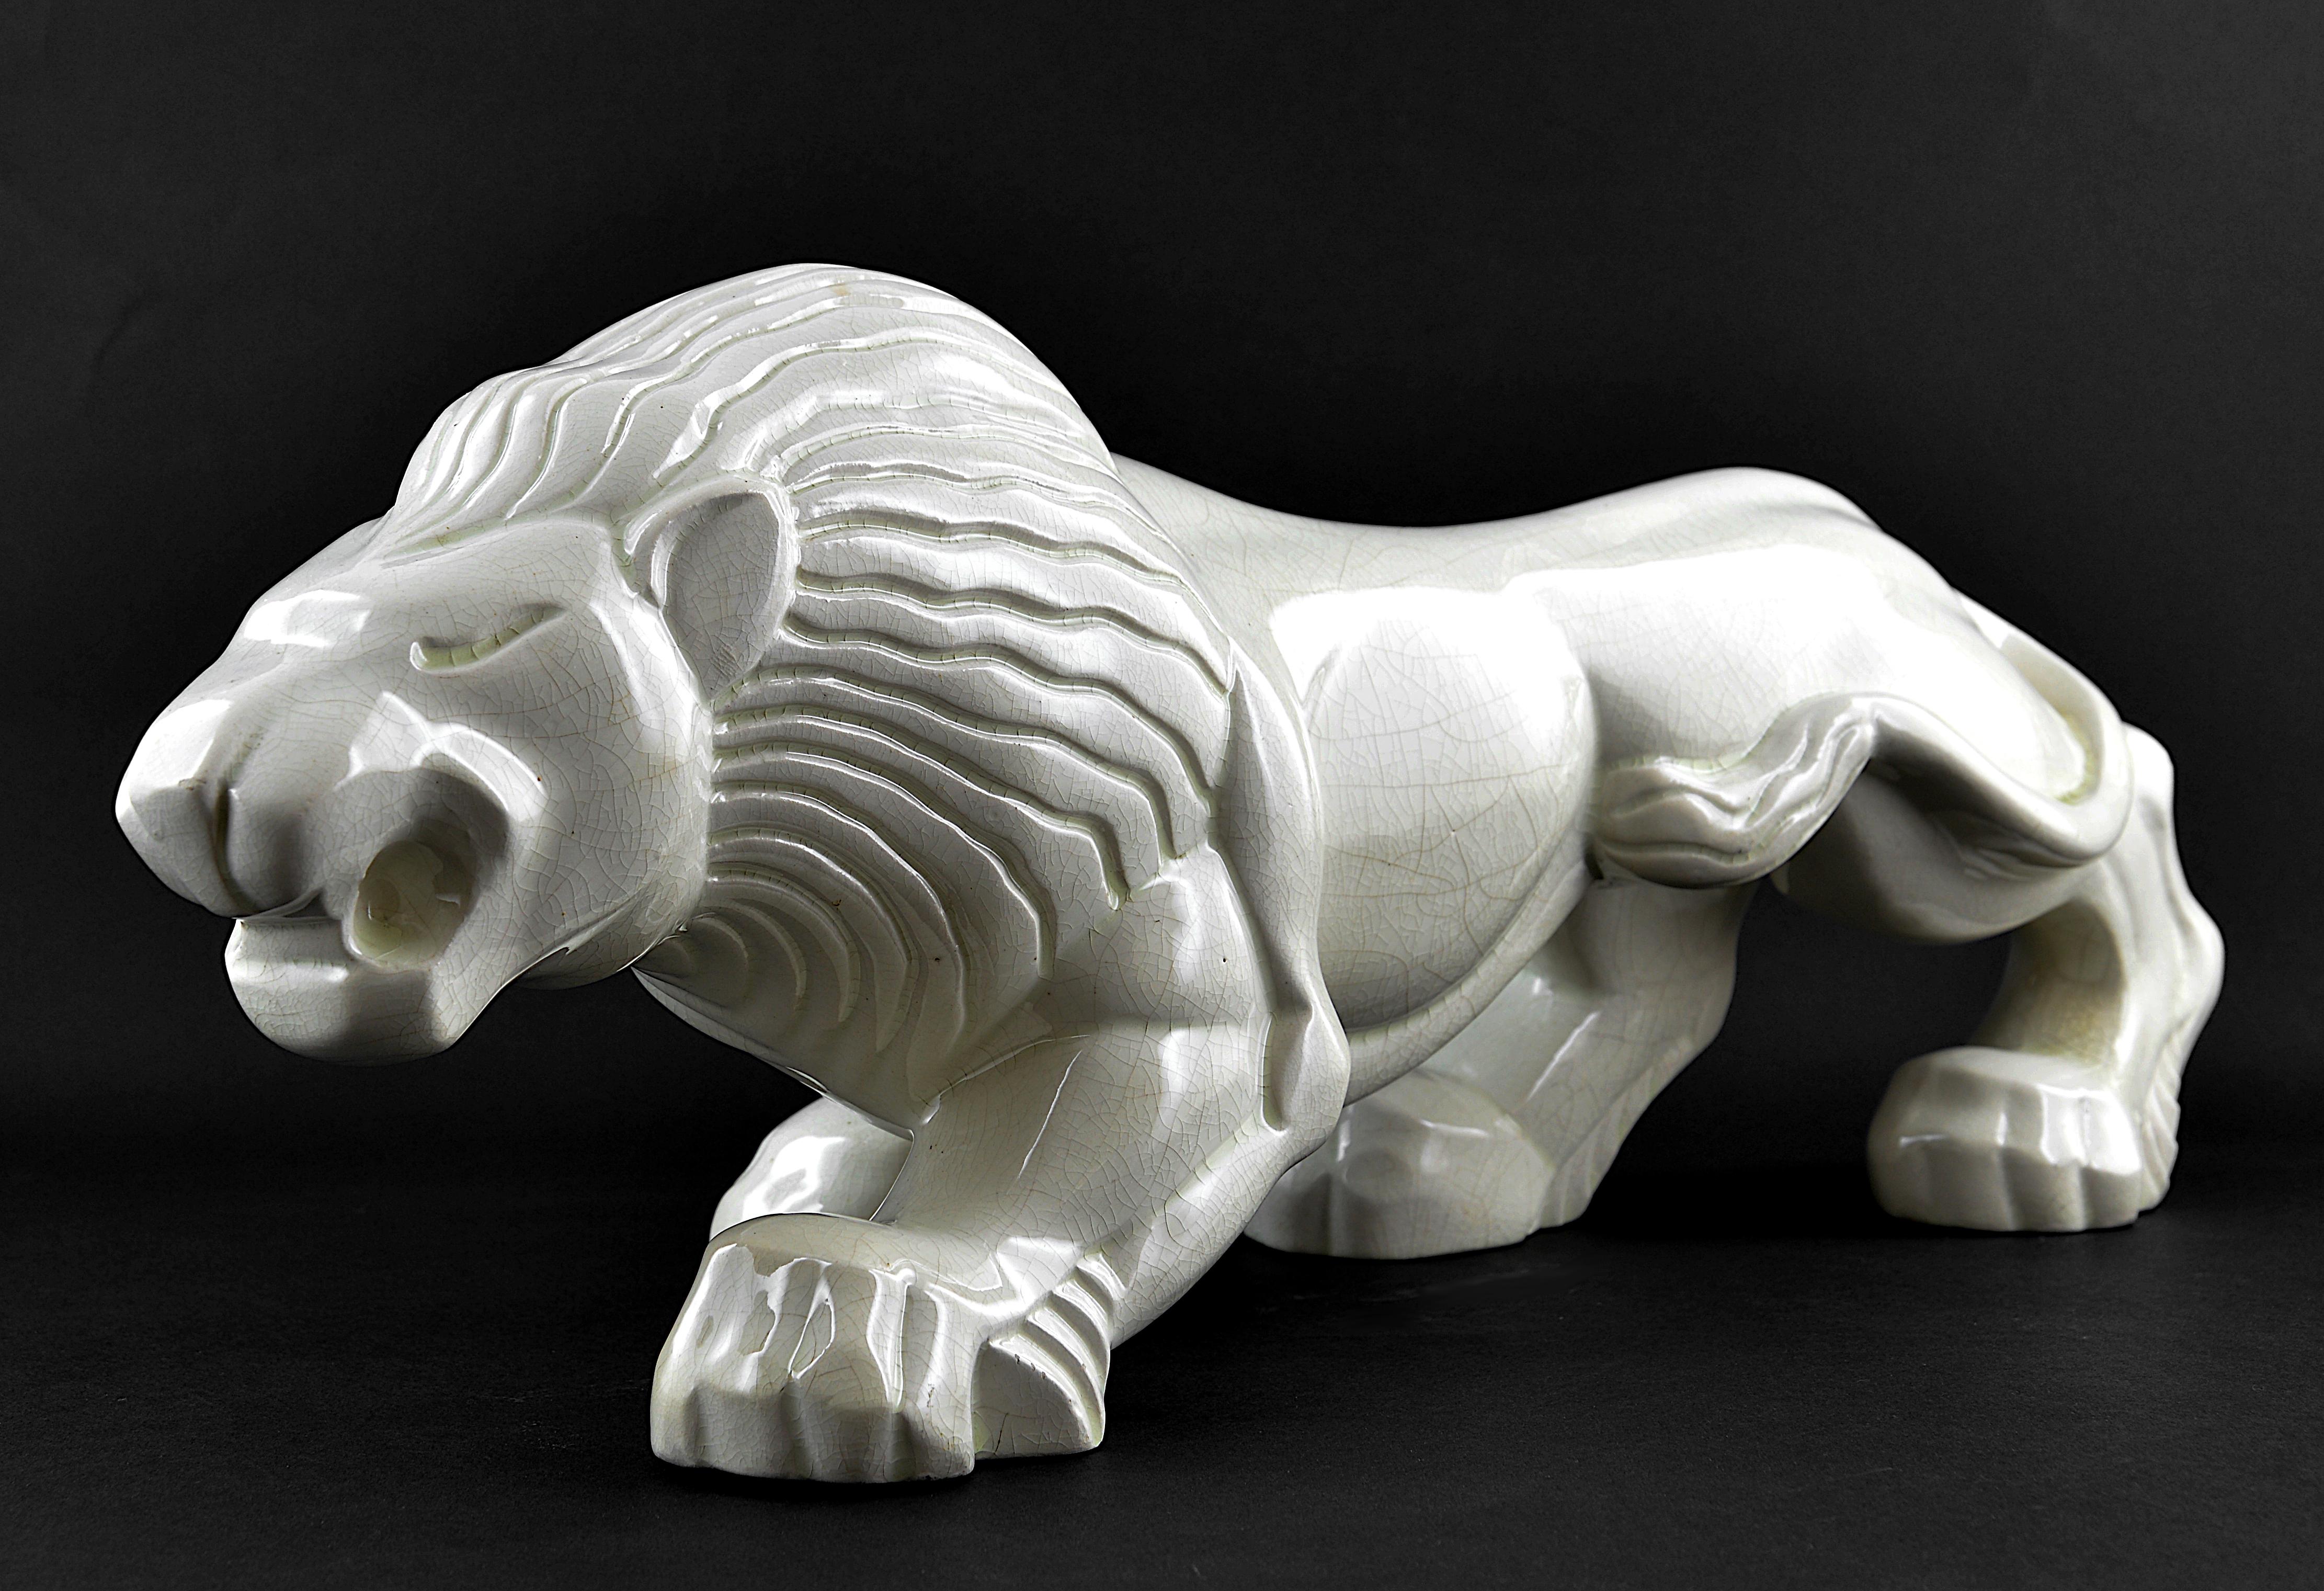 Any fair offer will be examined with the utmost attention, please send a message. Very rare lion by Charles Lemanceau at Saint-Clément's, France, circa 1925. French Art Deco glaze ceramic. Measures: Length 39 cm, 15.4 in., depth 11.5 cm, 4.5 in.,